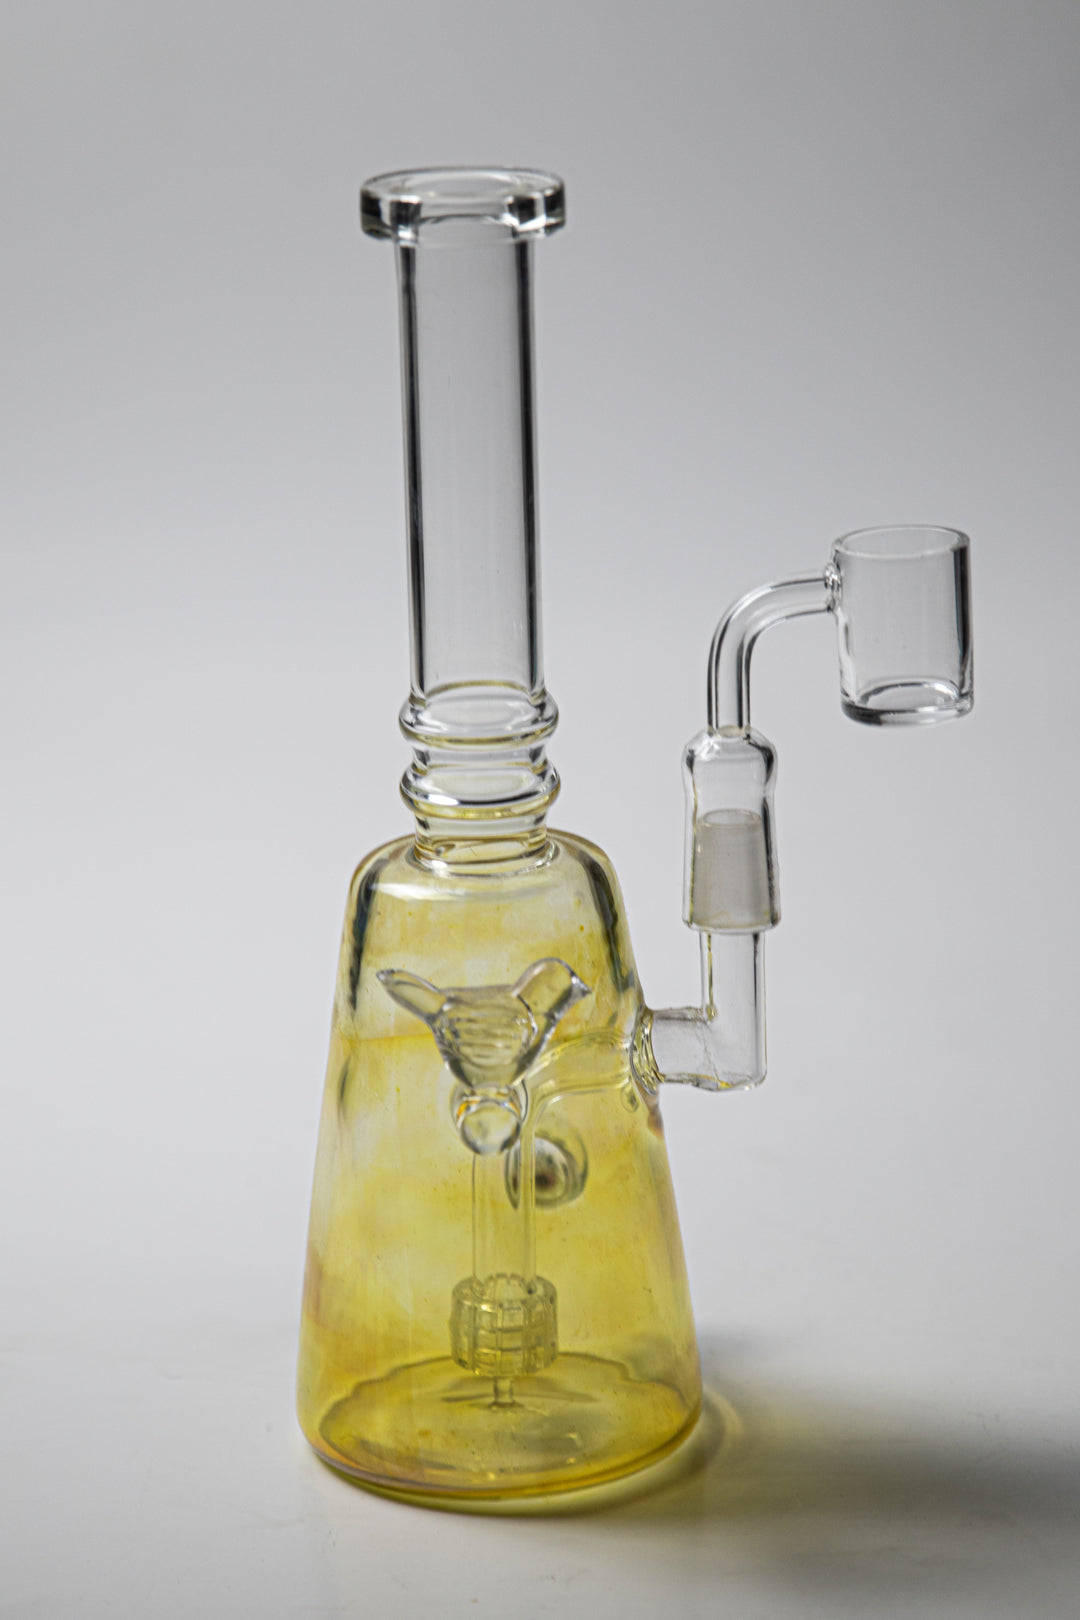 Yellow Bird Rig – an 8-inch water pipe crafted for weed and dabs. Now available for sale, this unique piece boasts a Yellow Bird design, a female banger for dabs, and a bent-down stem bubbler,The included percolator prevents water from splashing back into your mouth, cools the smoke down, and adds extra filtration, 